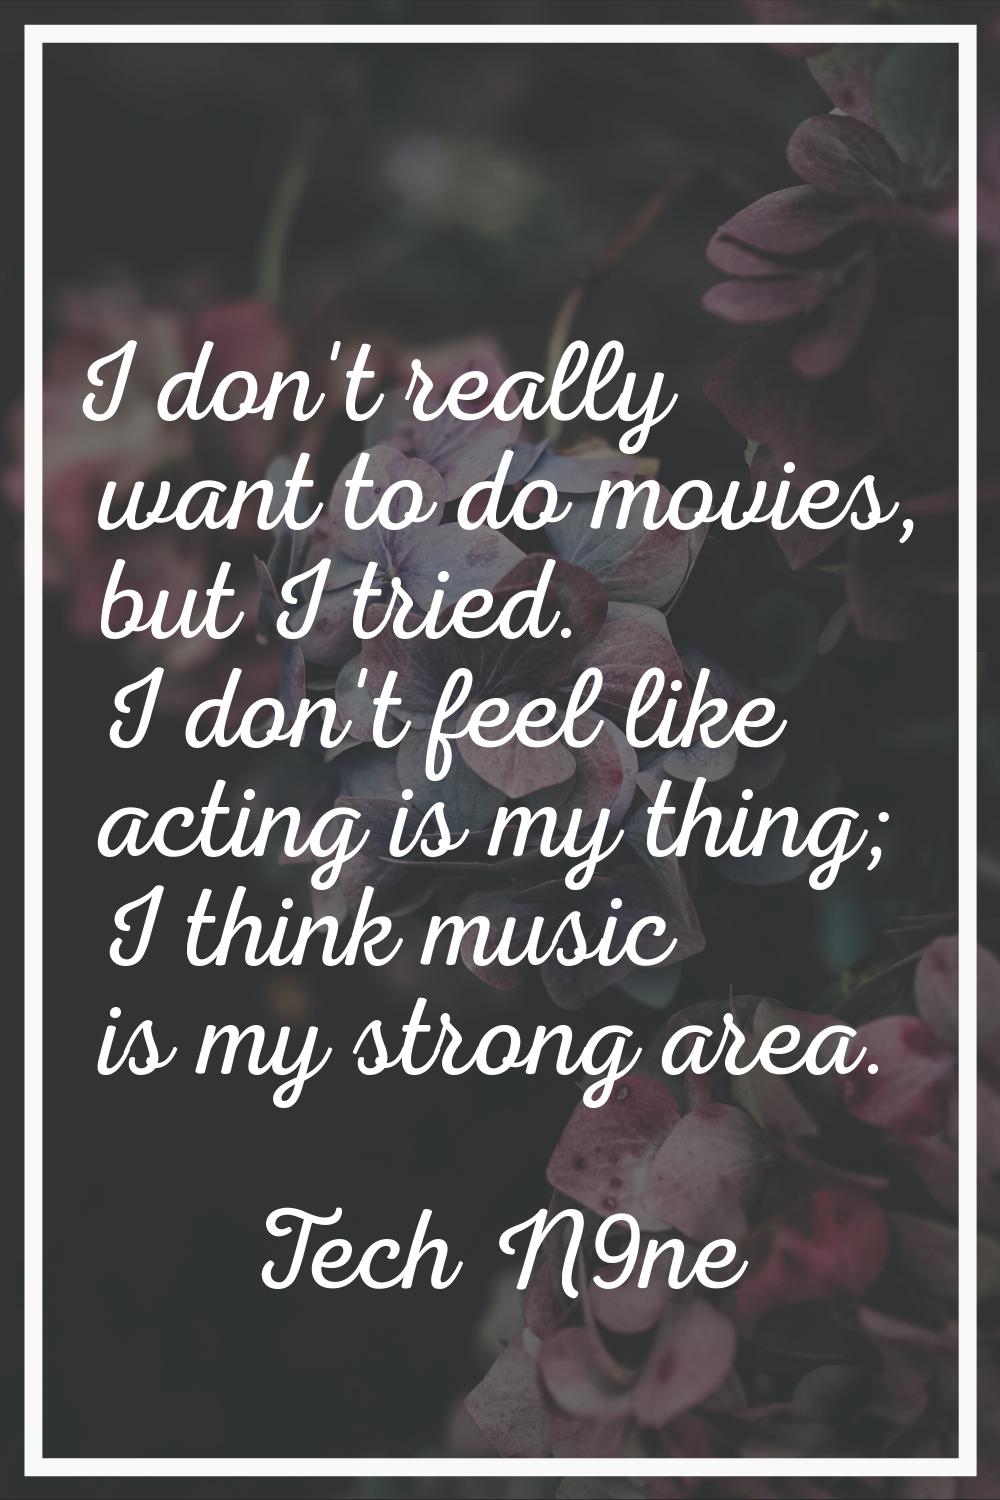 I don't really want to do movies, but I tried. I don't feel like acting is my thing; I think music 